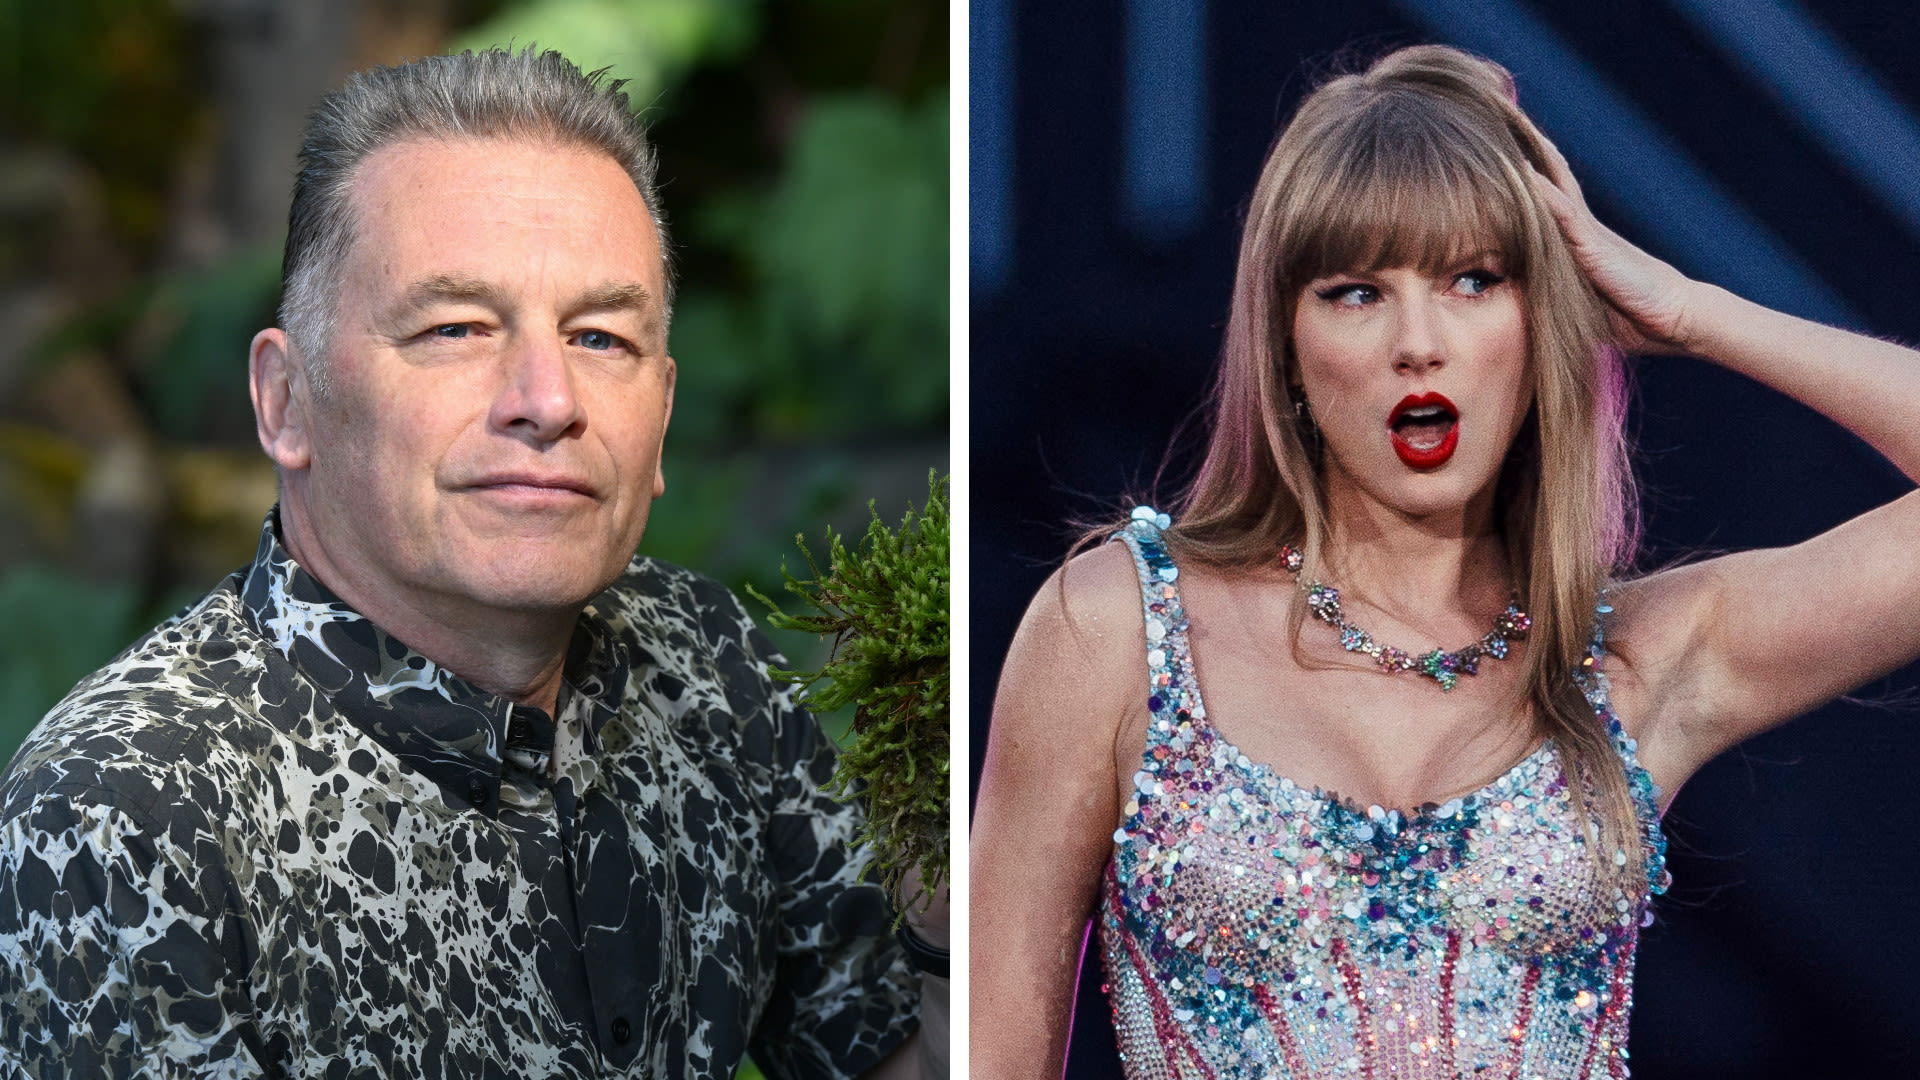 Chris Packham wants Taylor Swift to sell off her private jets